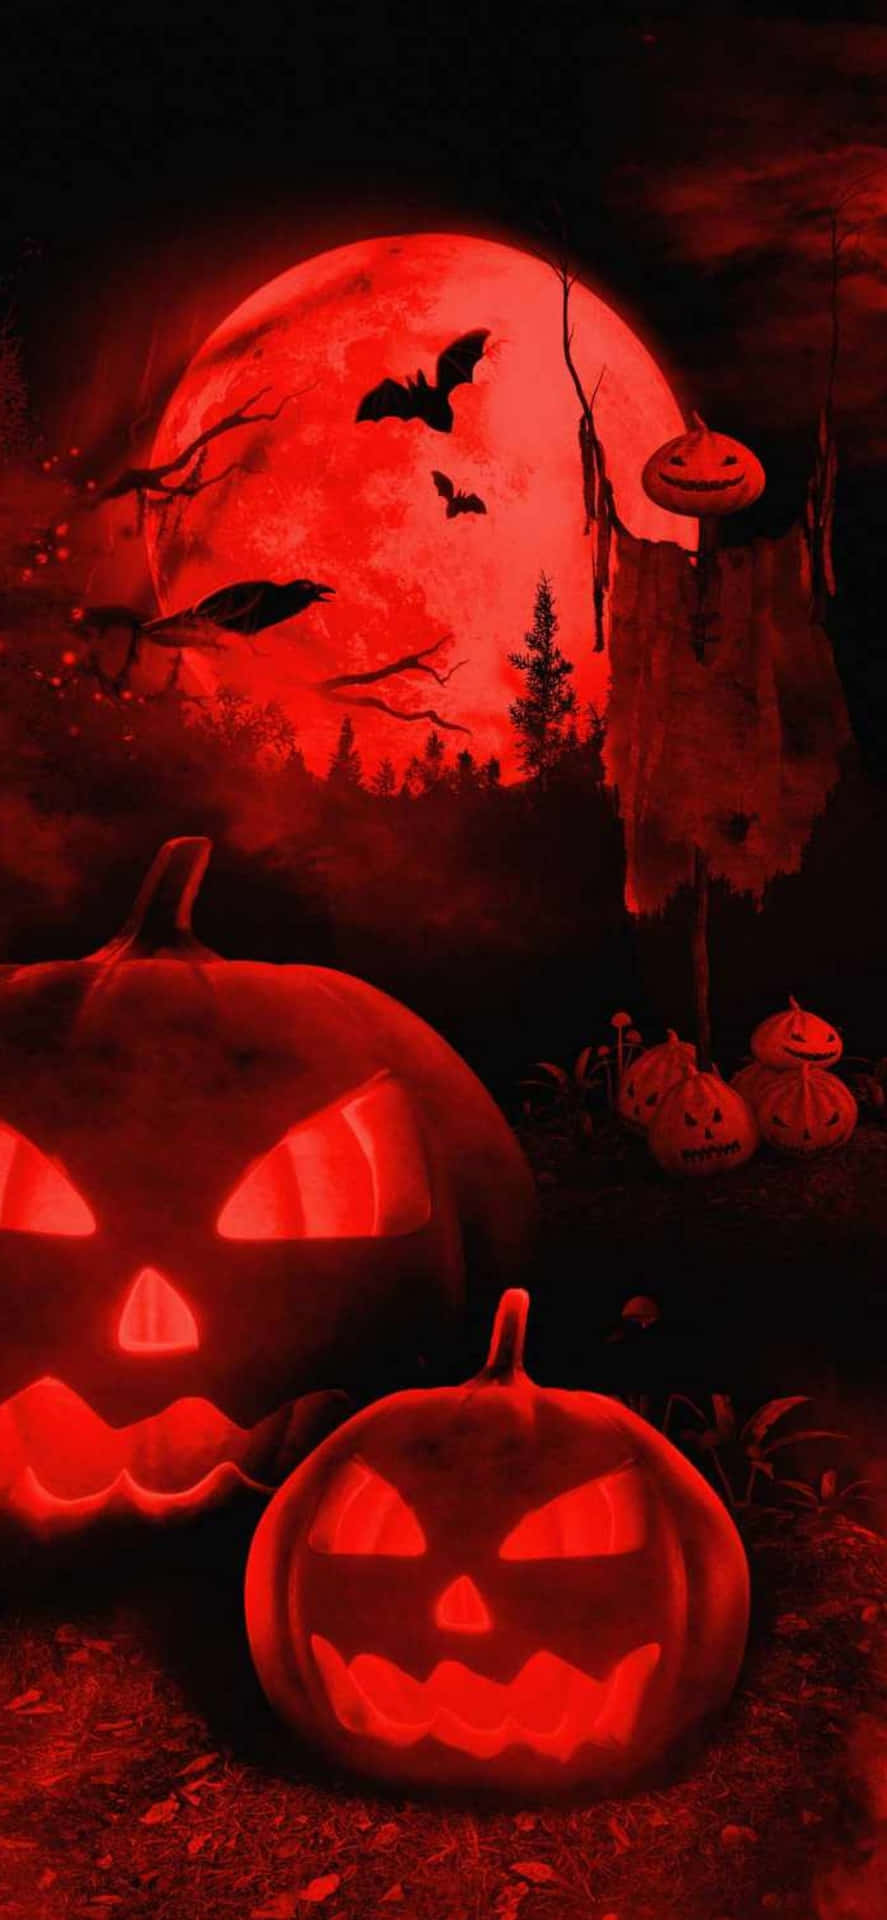 Celebrate Halloween in style with this spooky iPhone wallpaper